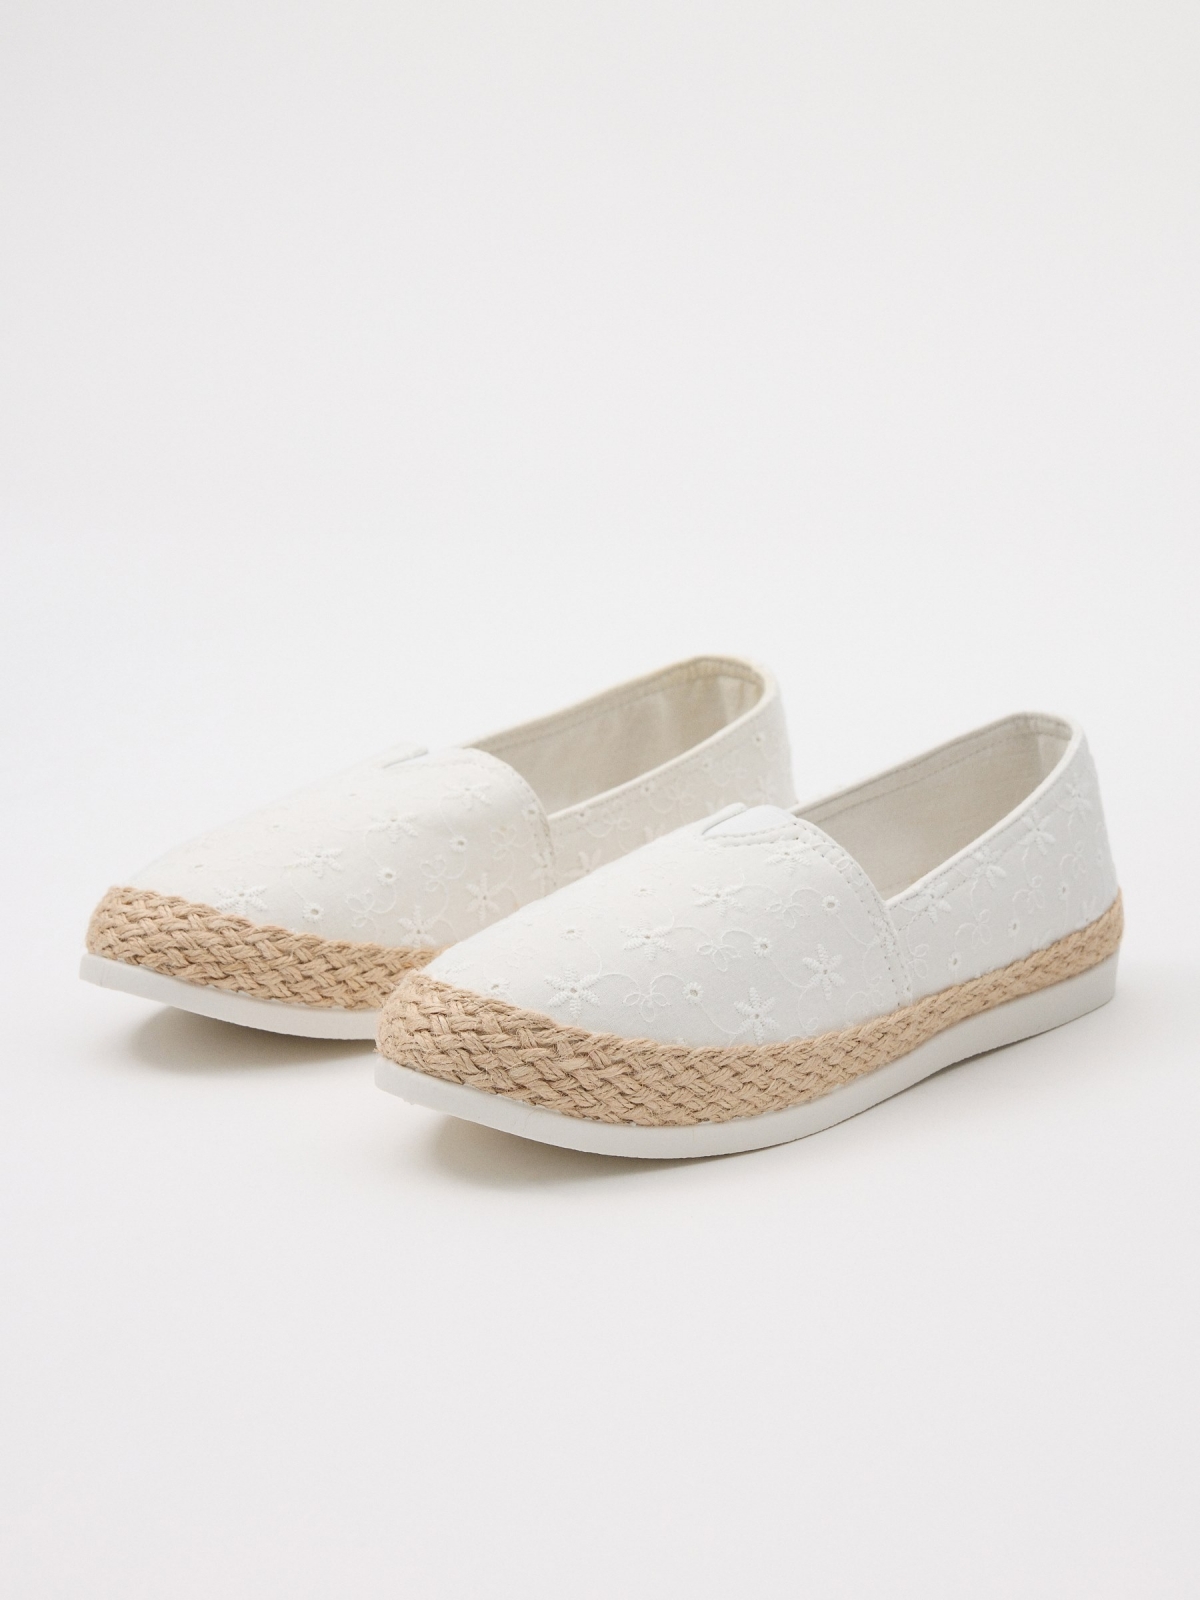 Casual embroidered espadrilles white 45º front view